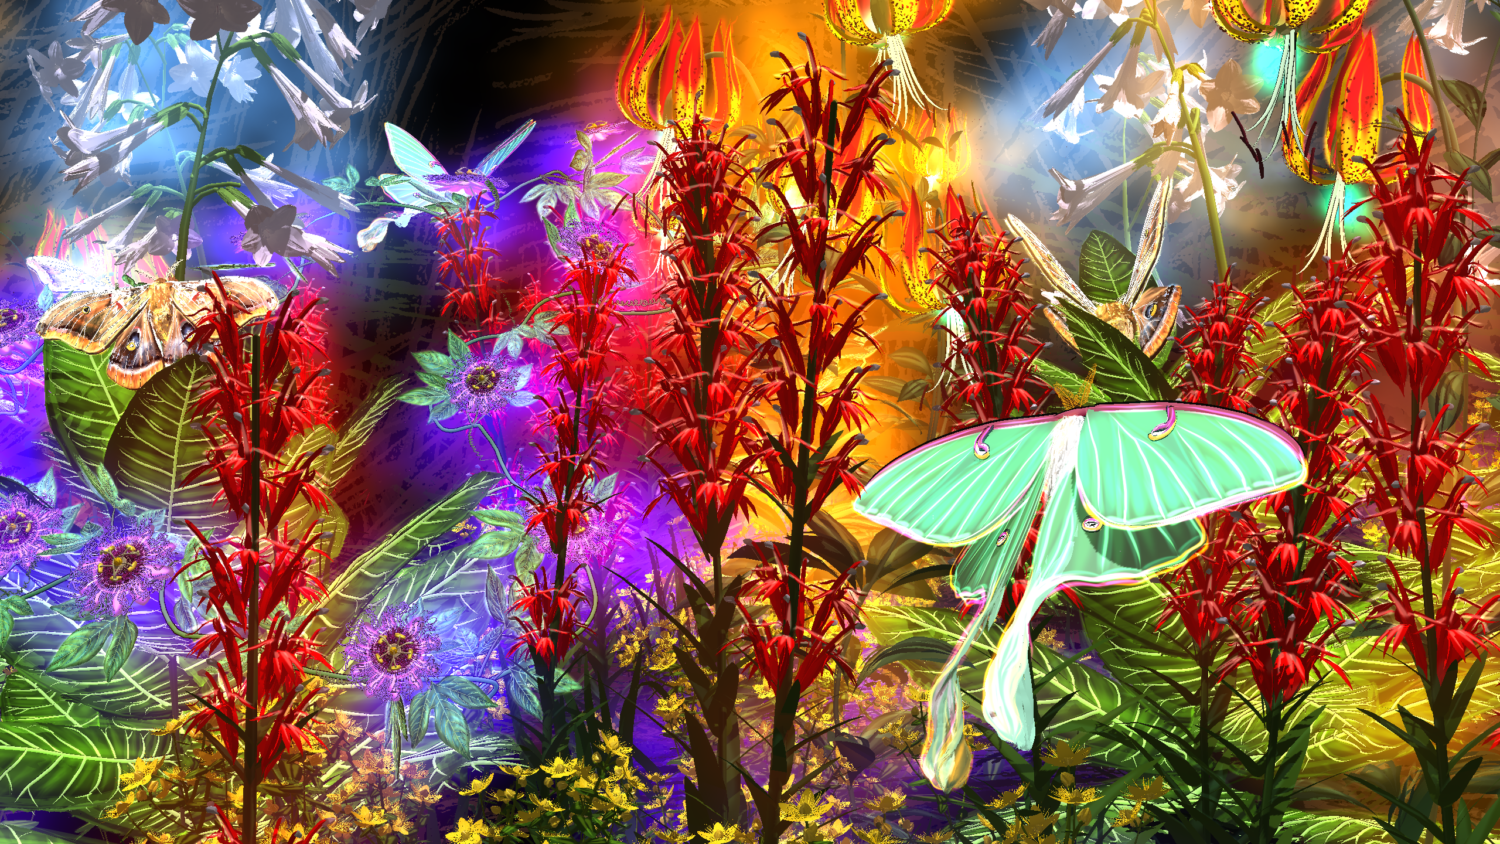 Colorful animated environment of plants, insects and light.